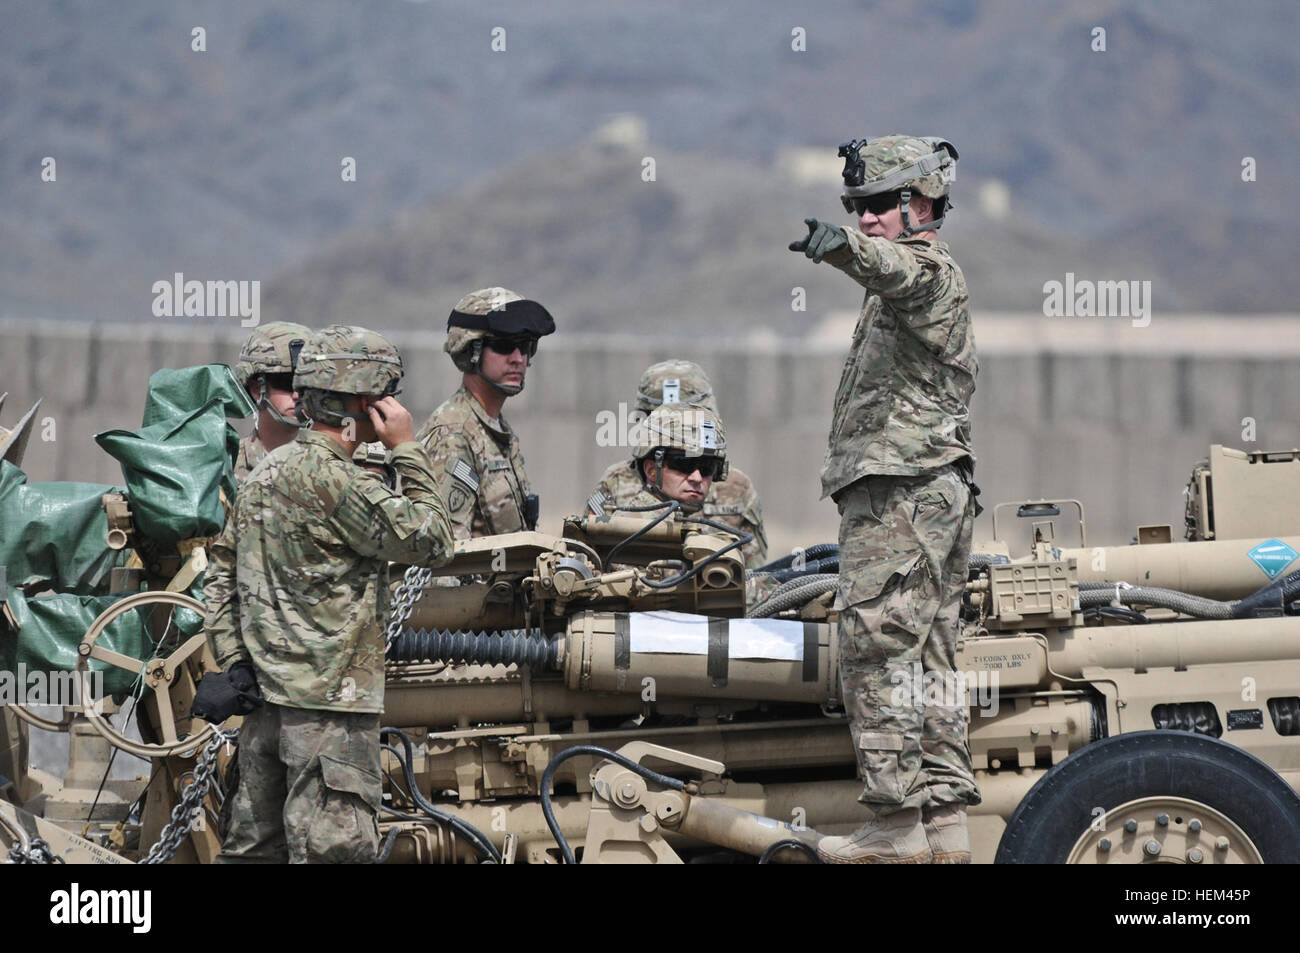 U.S. Army 1st Sgt. Michael Strate (right), C-Battery, 1st Battalion (Air Assault), 377th Field Artillery Regiment, Task Force Spartan Steel, from International Falls, Minn., prepares to transport the M777 howitzer from Forward Operating Base Salerno to Combat Outpost Chamkani March 28. Flickr - The U.S. Army - Preparing to transport Stock Photo